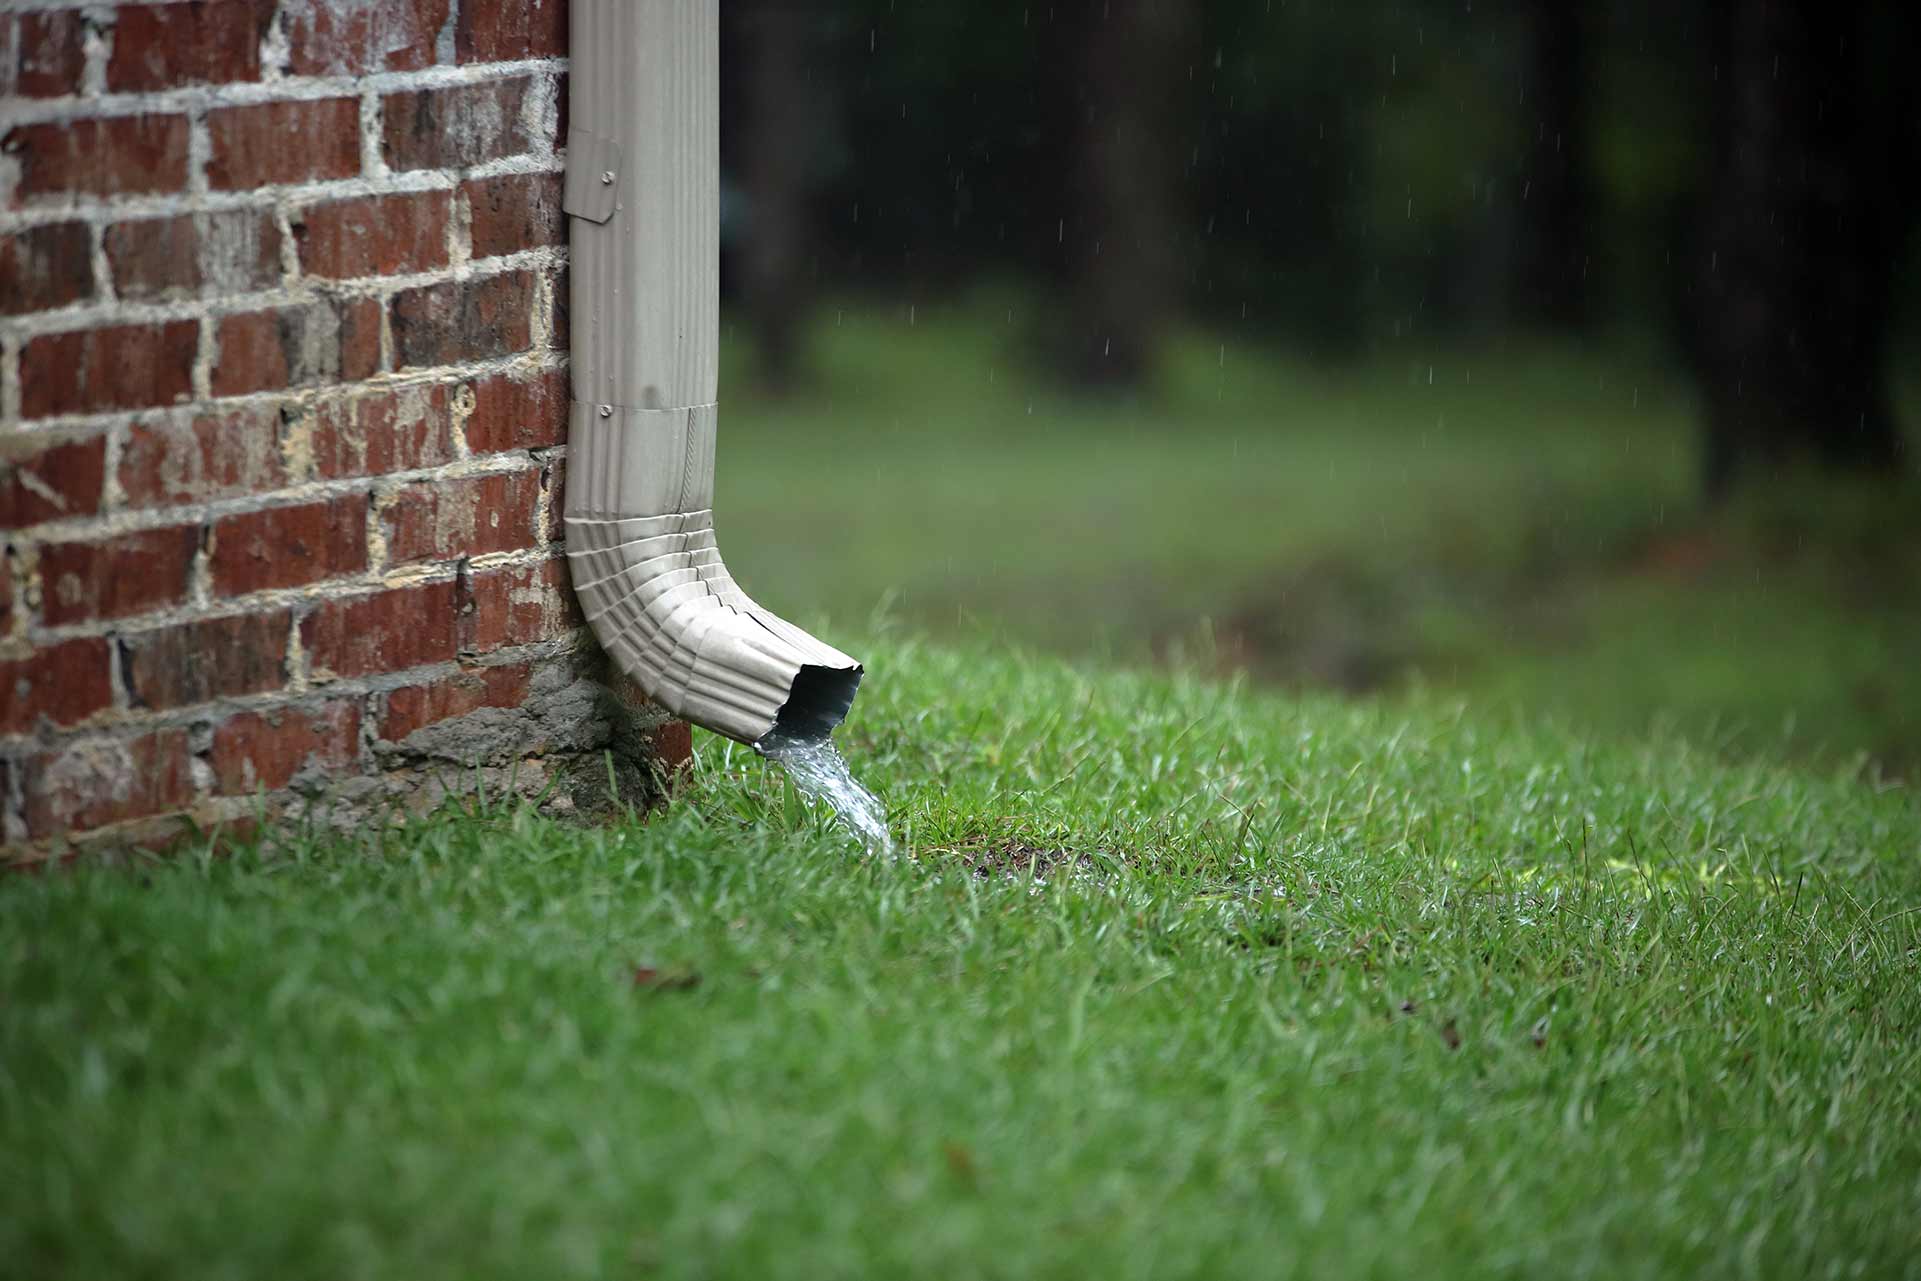 Downspout spitting water into yard